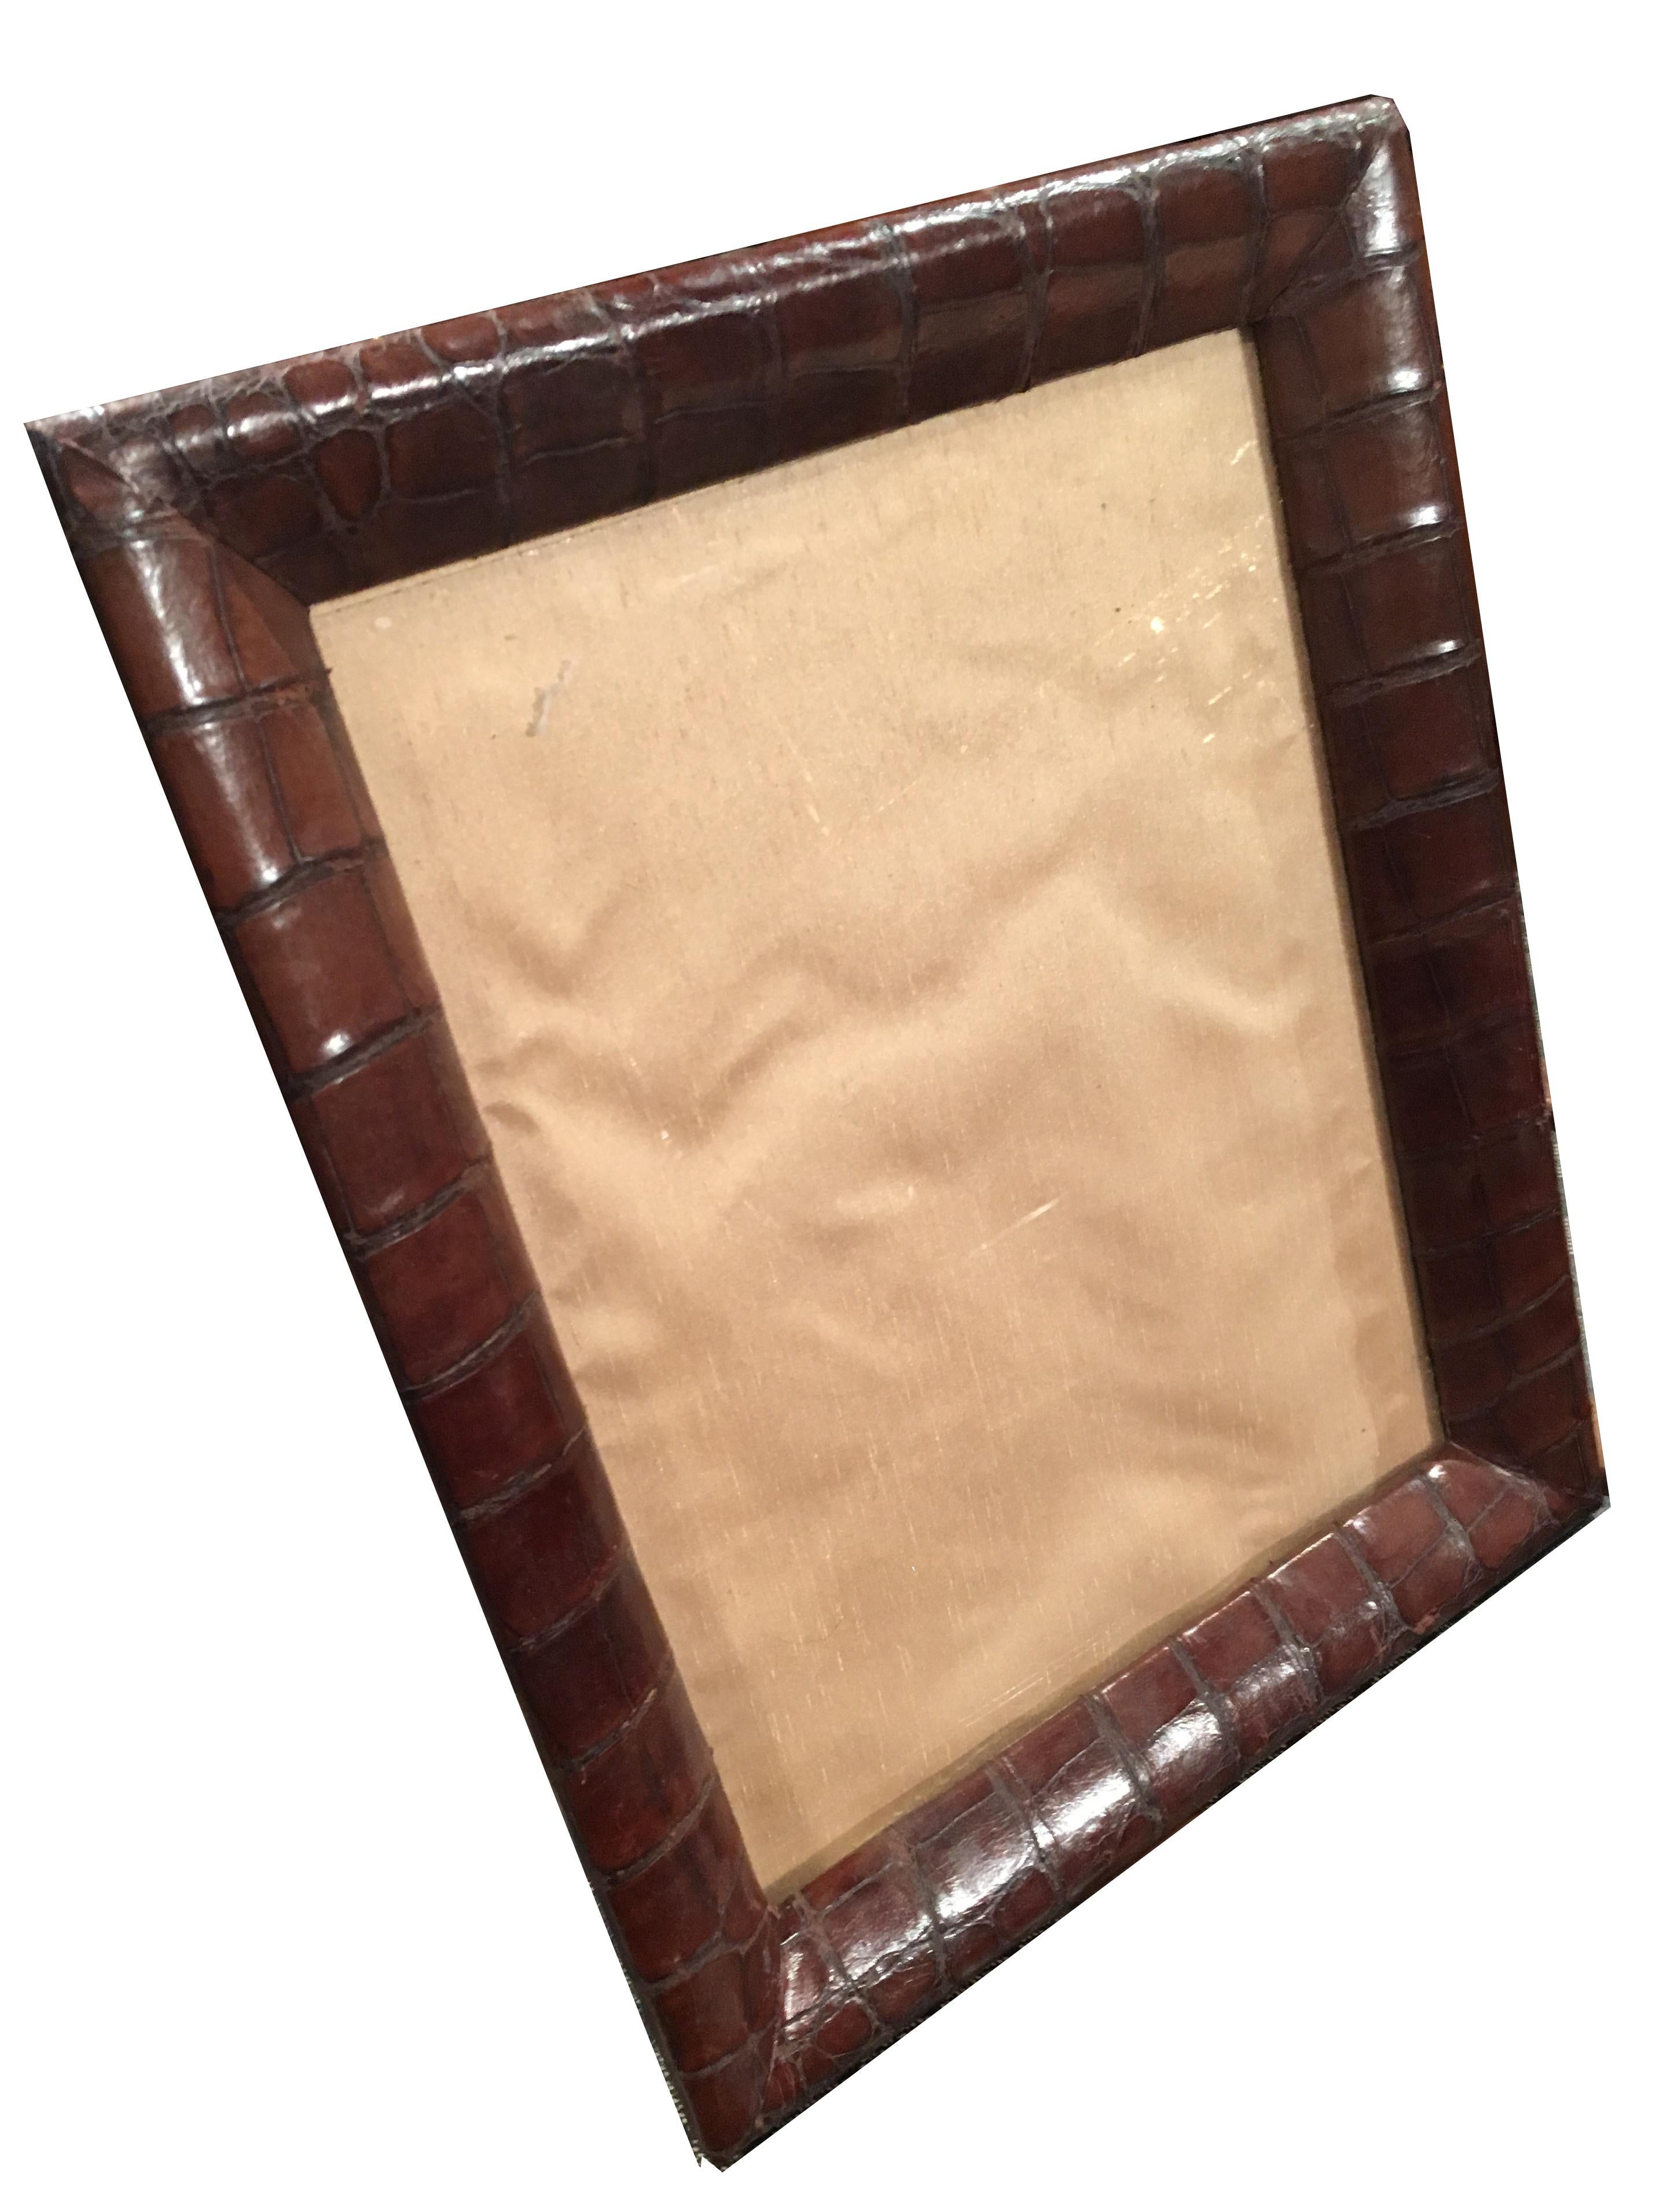 An extremely attractive Edwardian / Art Deco crocodile skin photograph frame, circa 1910-1920.

In superb condition overall. The frame has a two way leg, meaning it can be used in either portrait or landscape mode.

The crocodile edging is